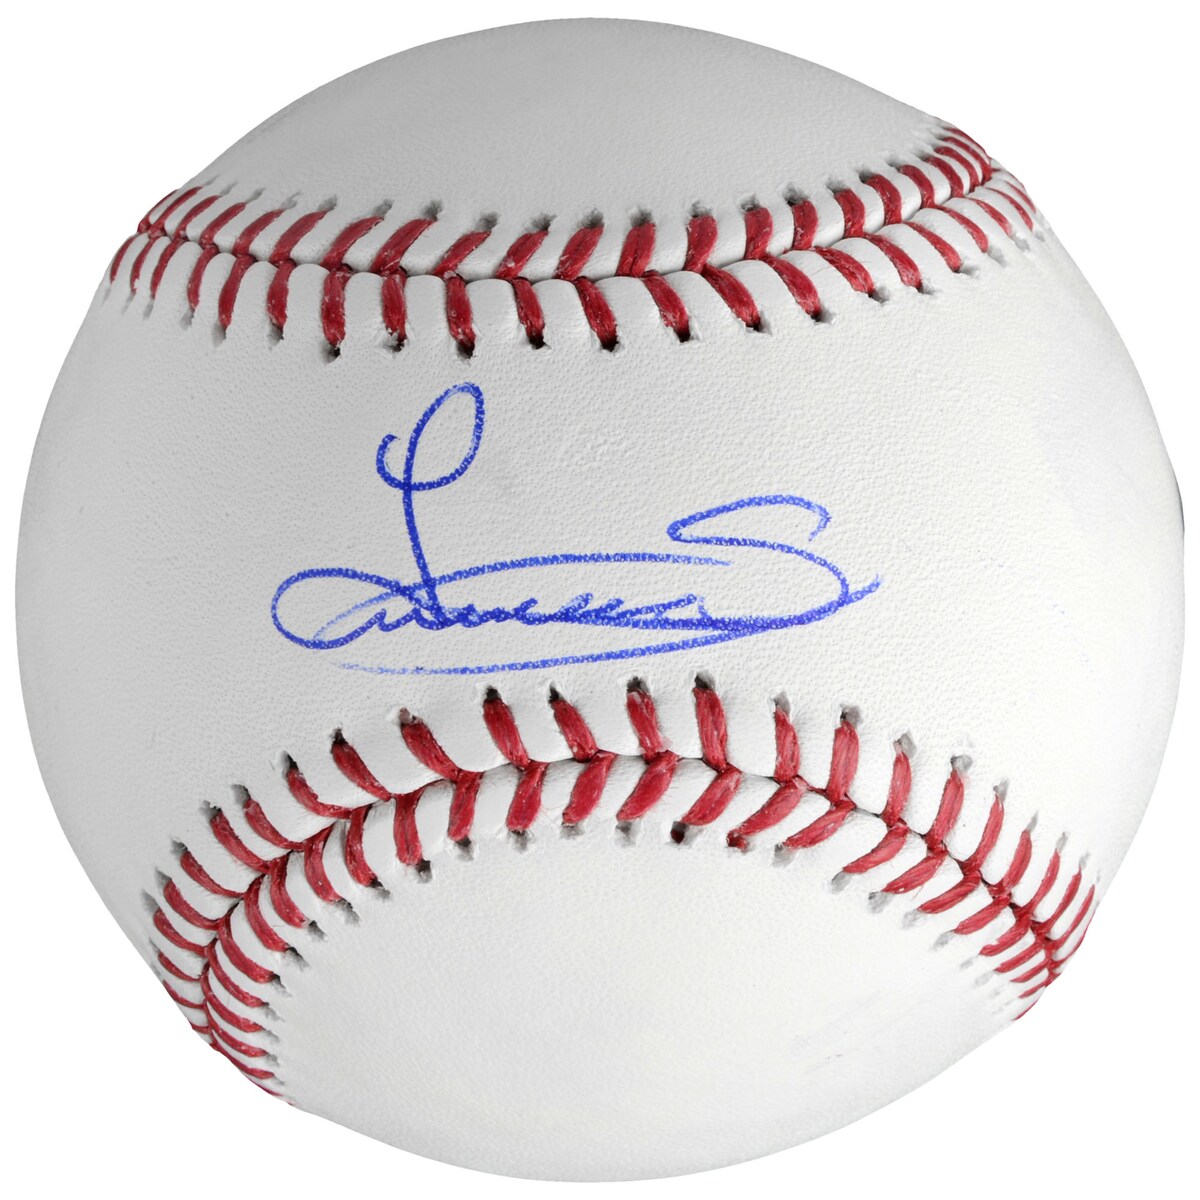 This baseball has been personally hand-signed by pitcher Luis Severino. It has been obtained under the auspices of the M...